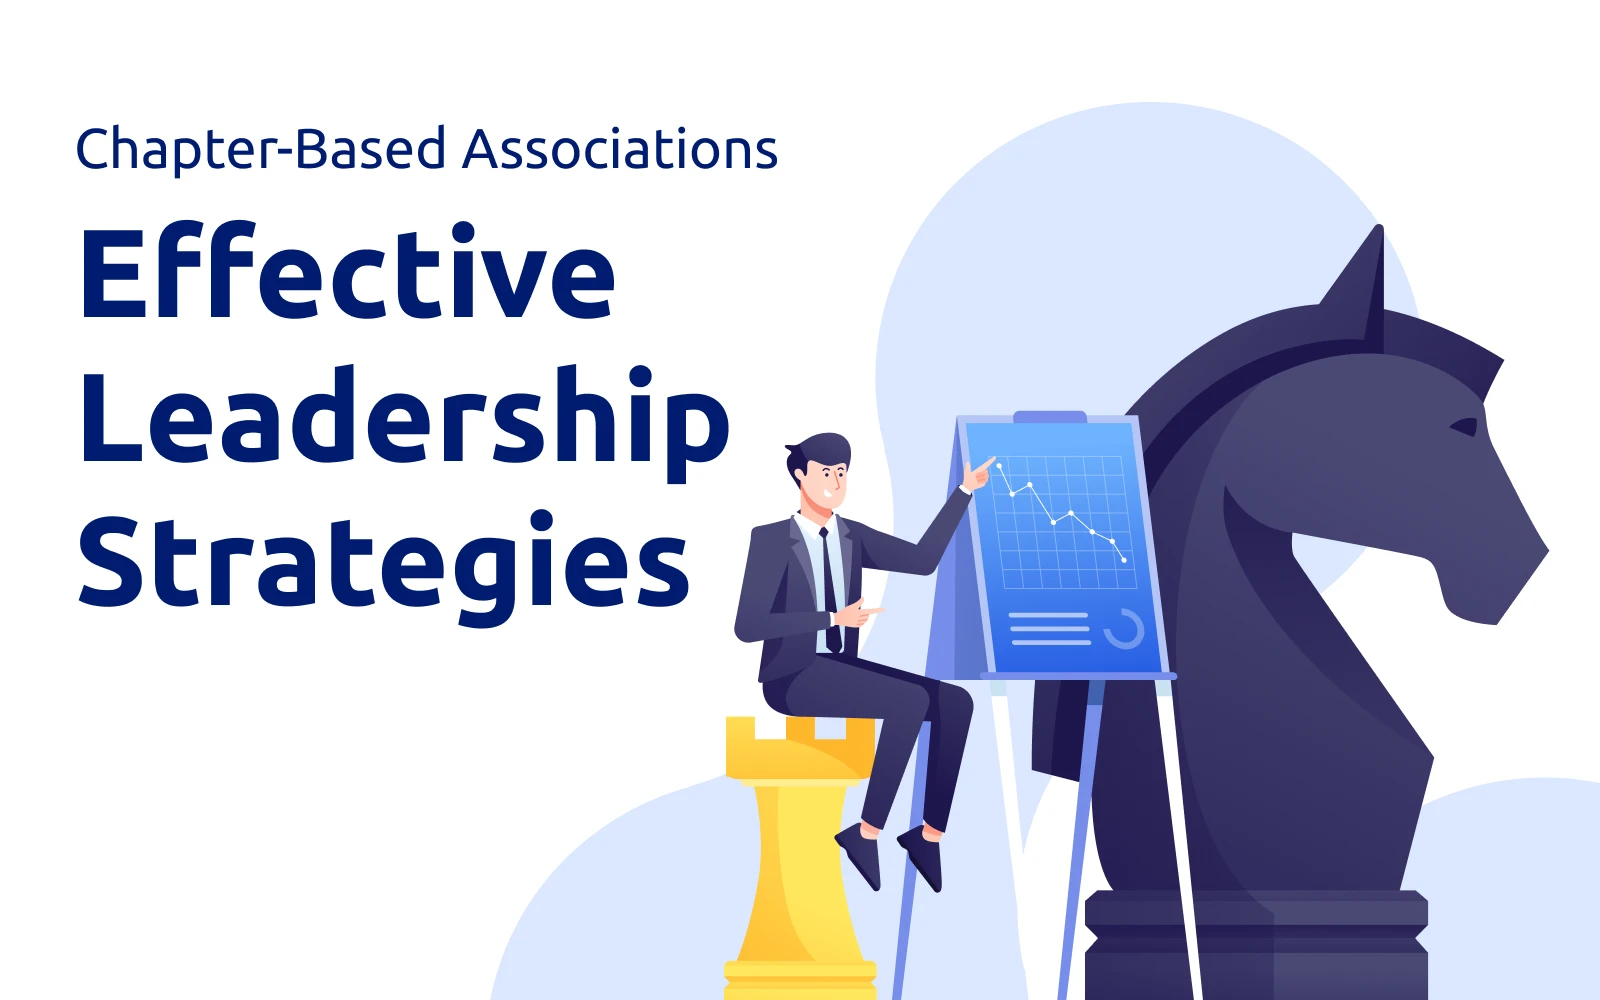 Effective Leadership Strategies for Multi-Chapter Associations